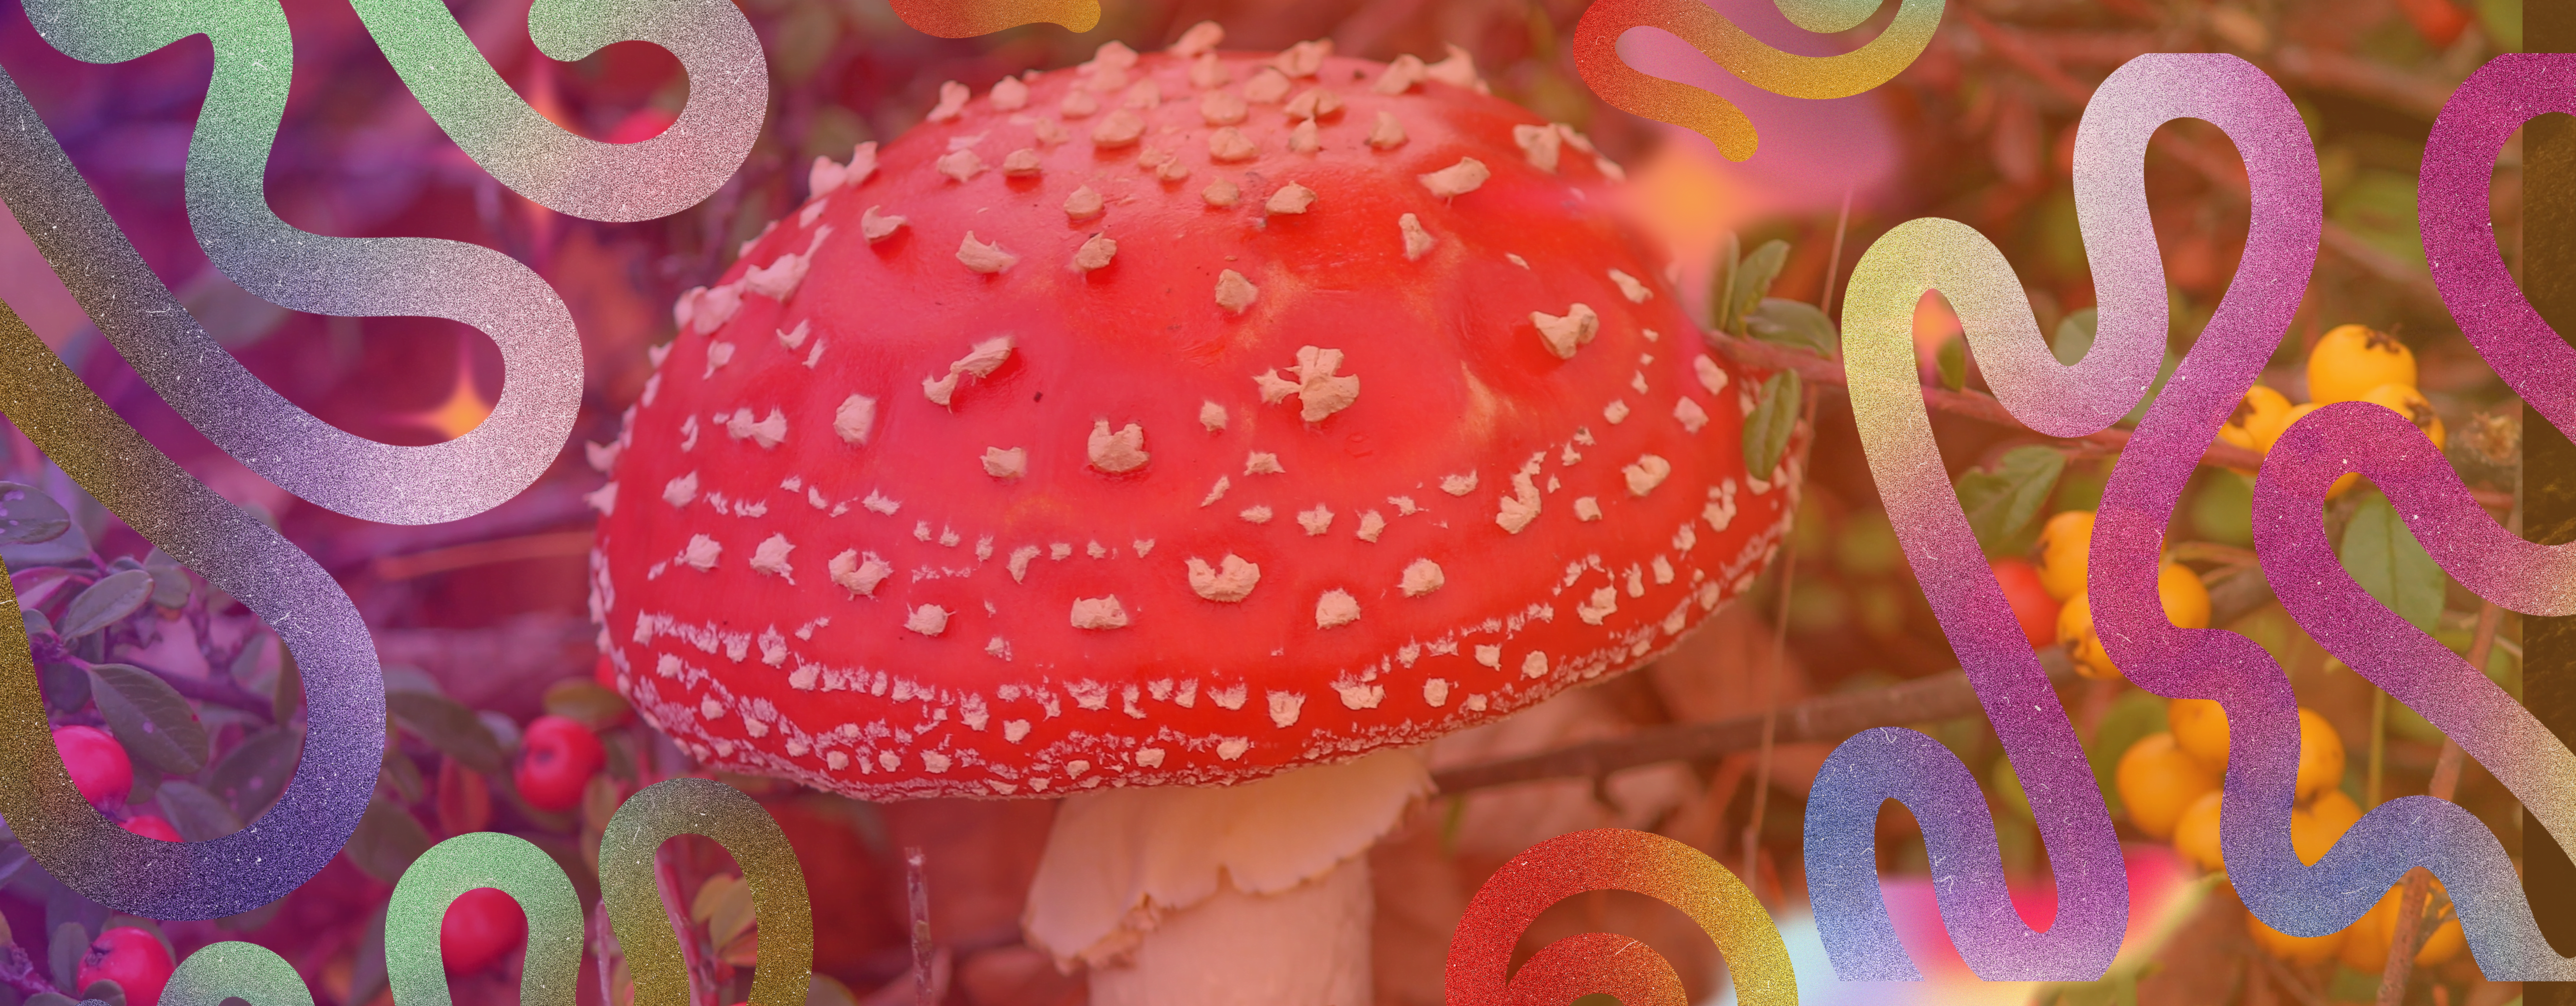 Craving Amanita Gummies? Here’s Where to Score the Best Quality!